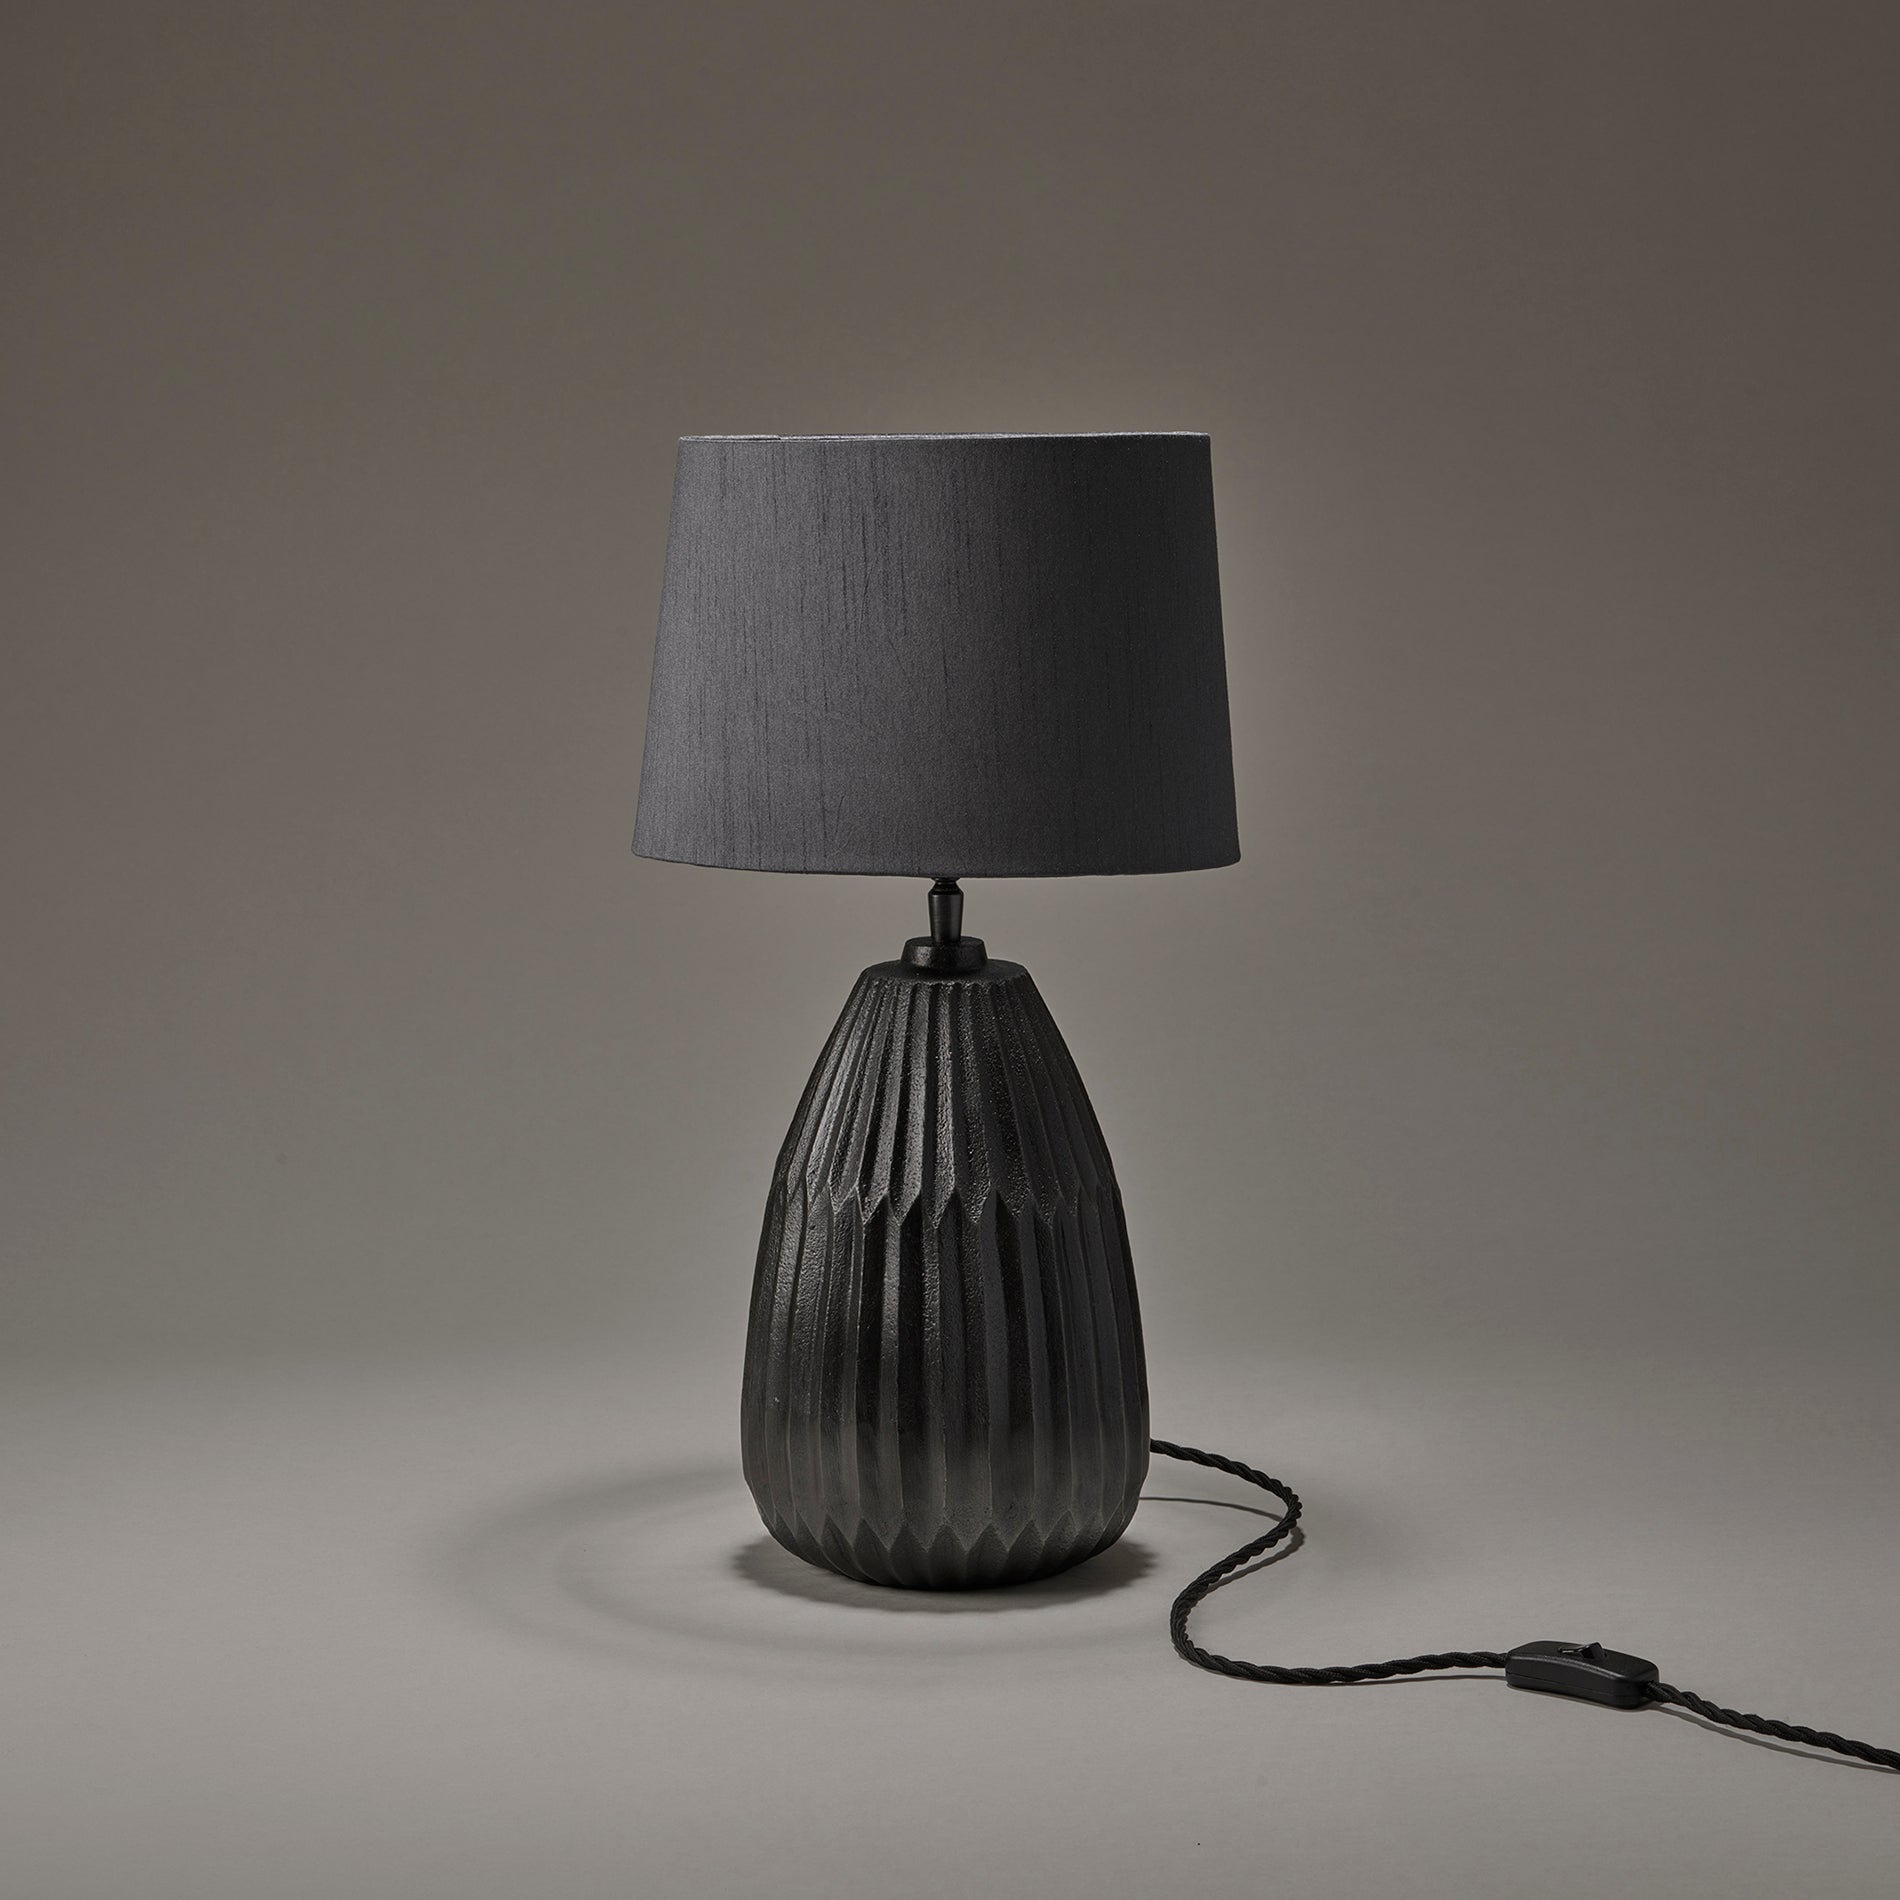 ornate thistle table lamp in pewter with small empire lampshade in grey